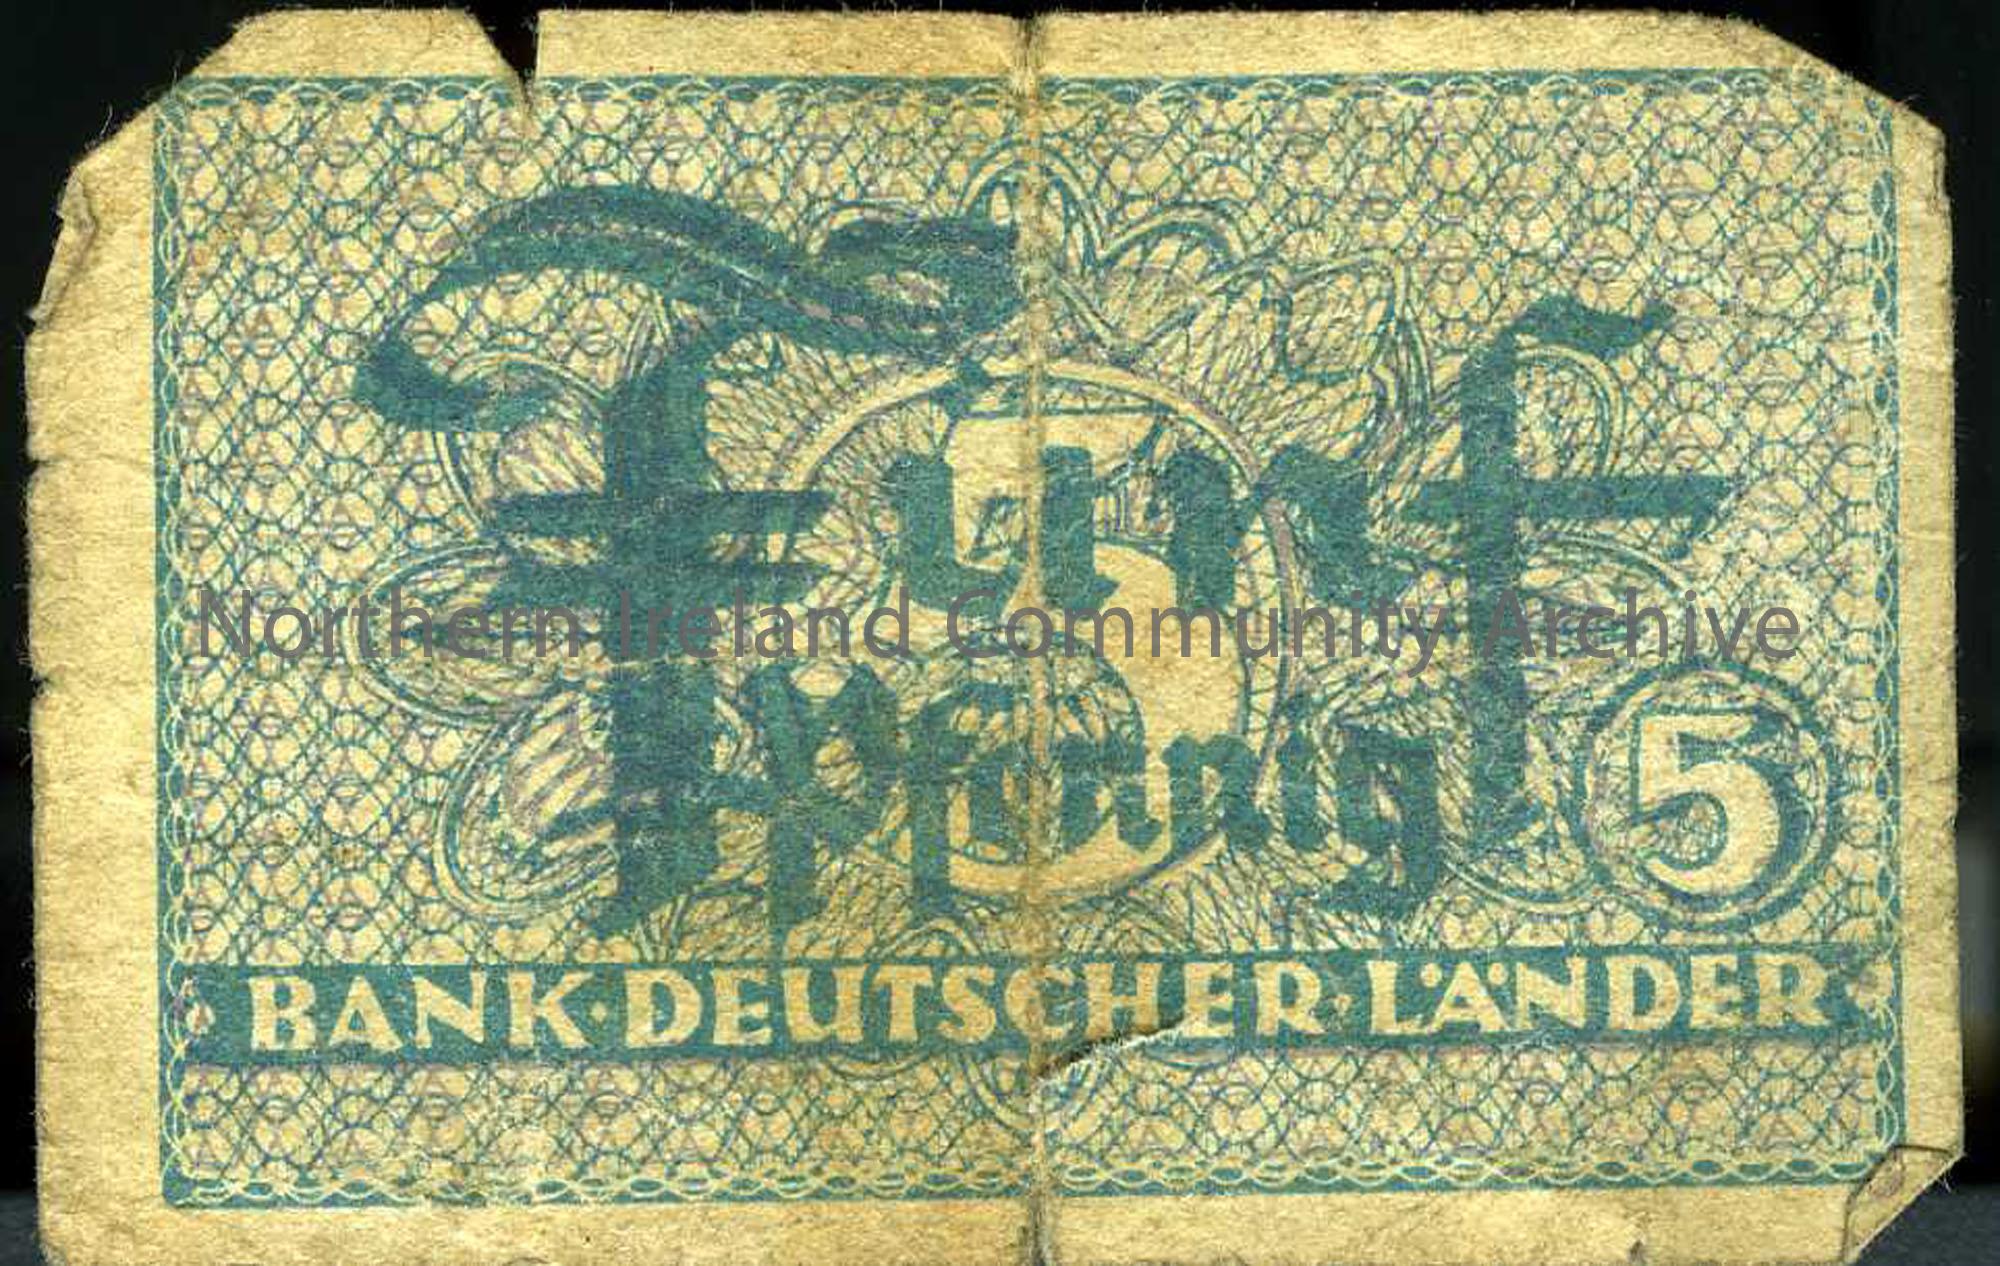 German bank note for 5 marks